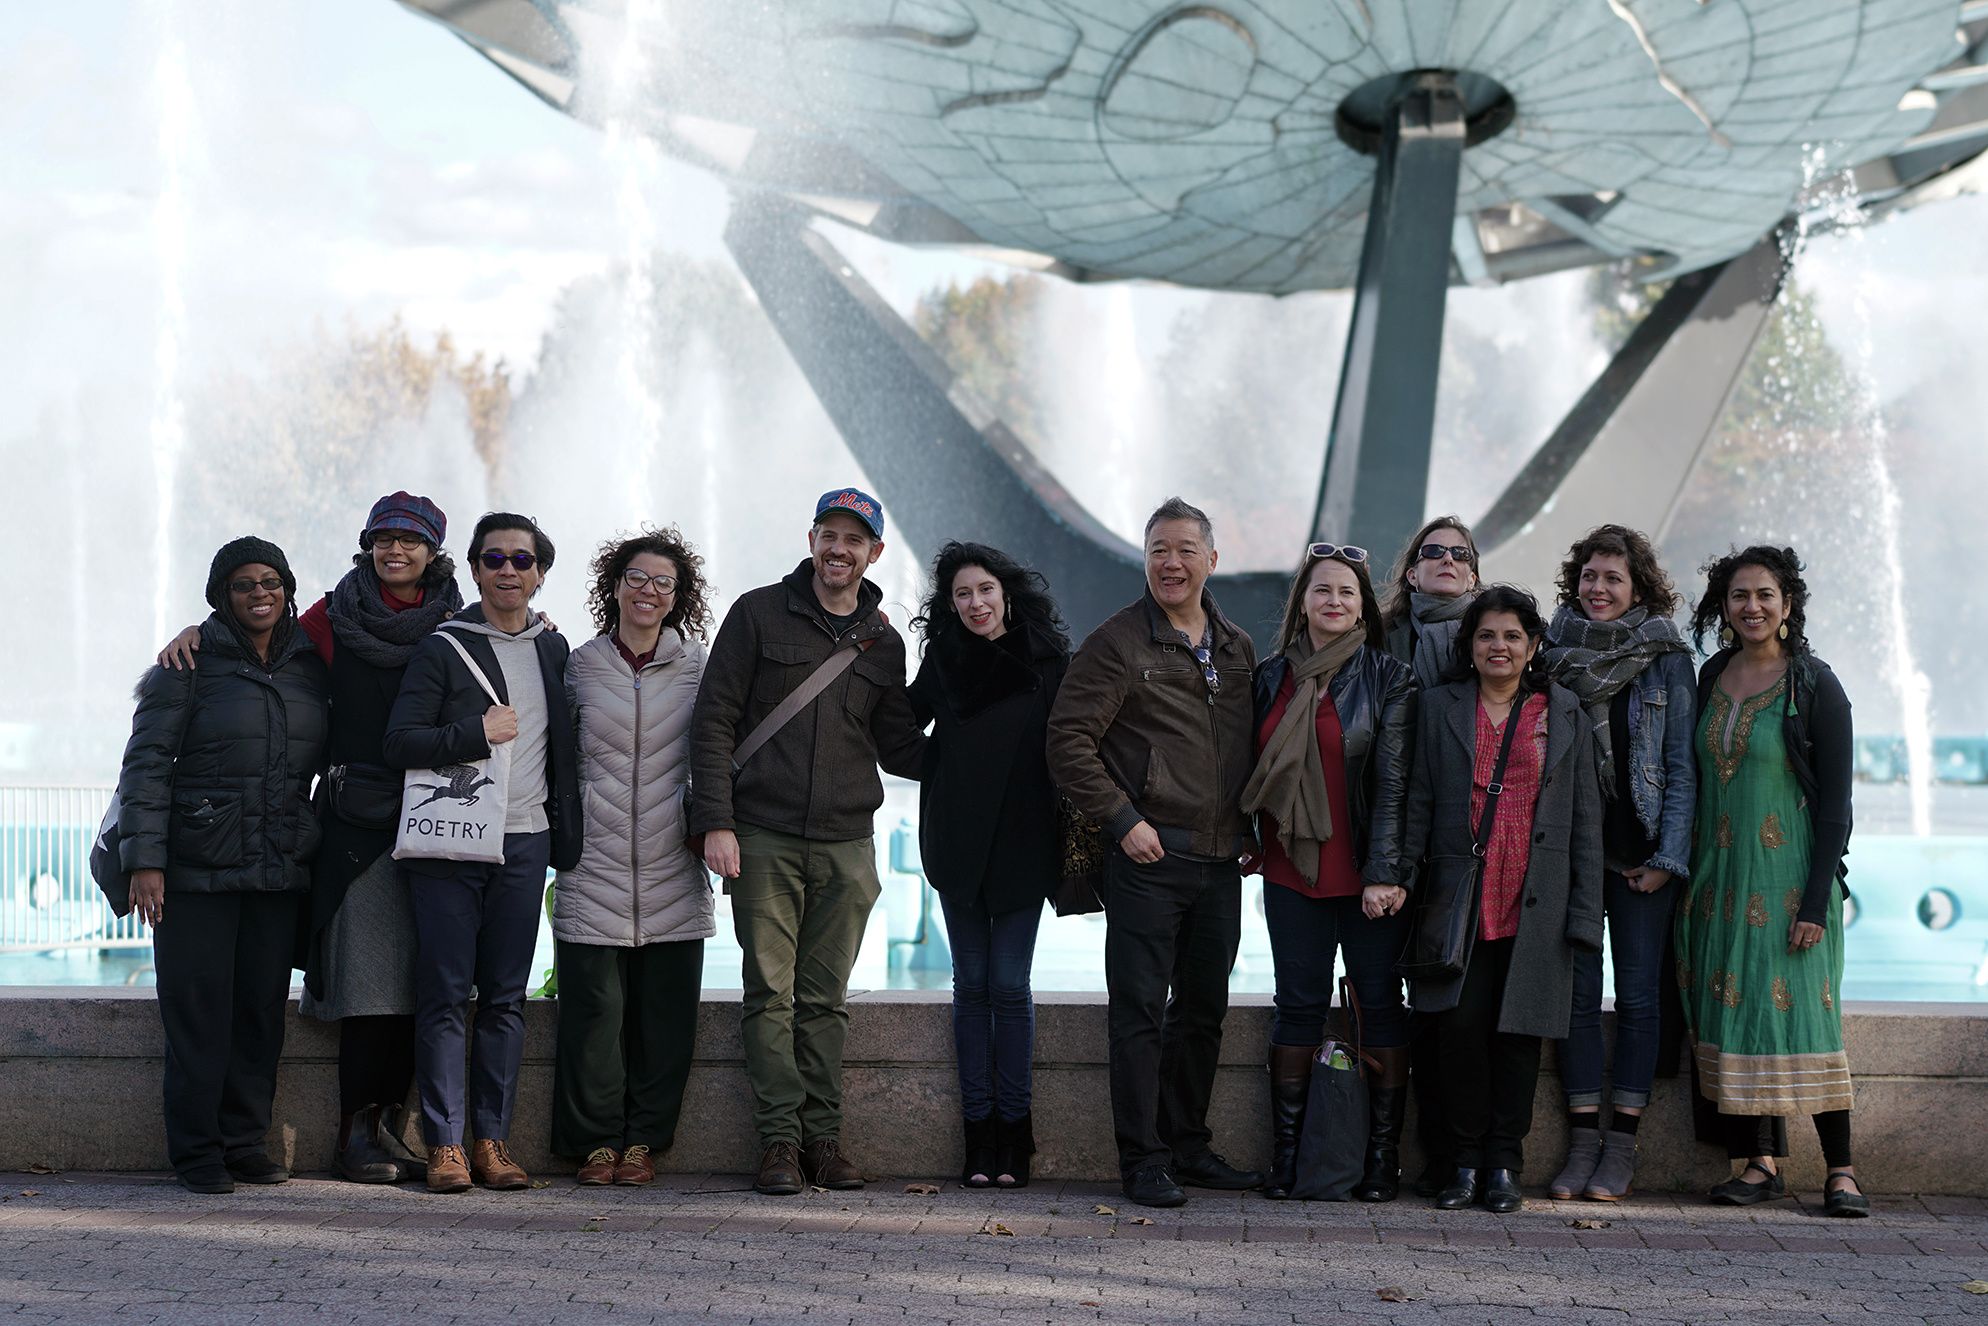 QUEENSBOUND poets gather at the Unisphere - Flushing Meadows, Queens